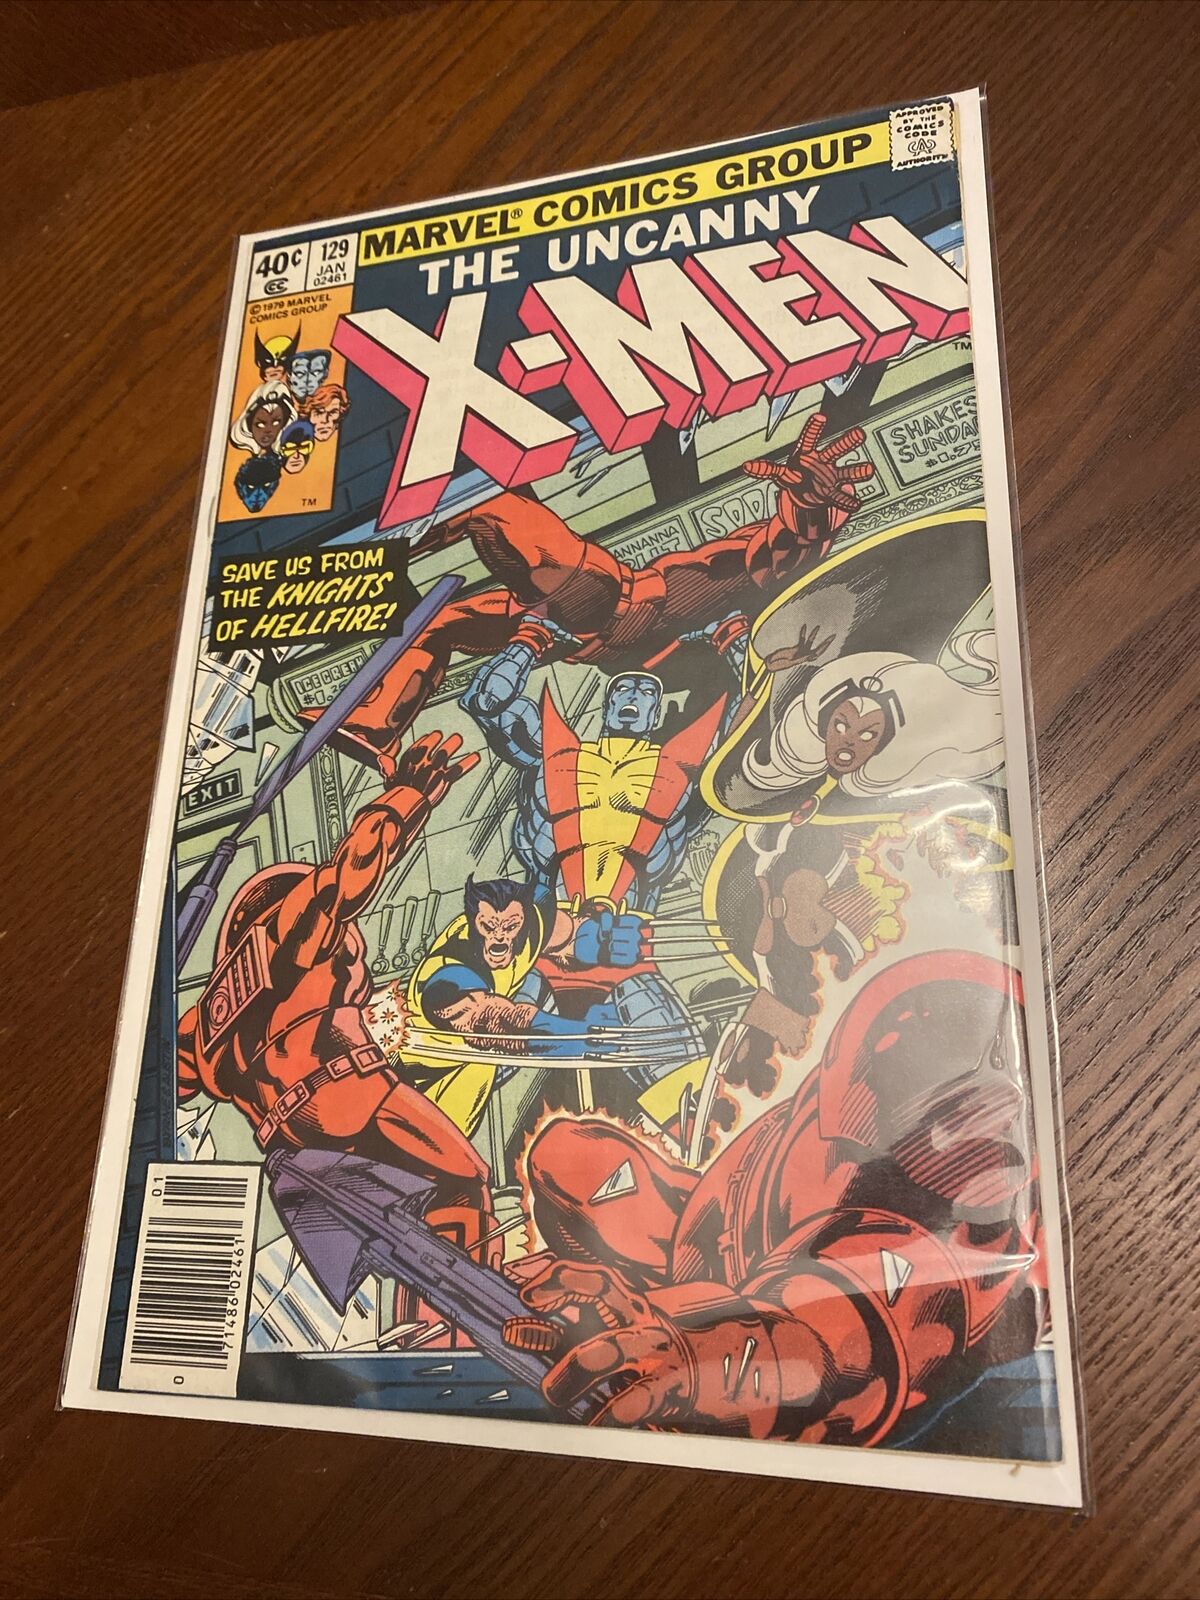 The Uncanny X-Men #129 - Save Us From the Knights of Hellfire